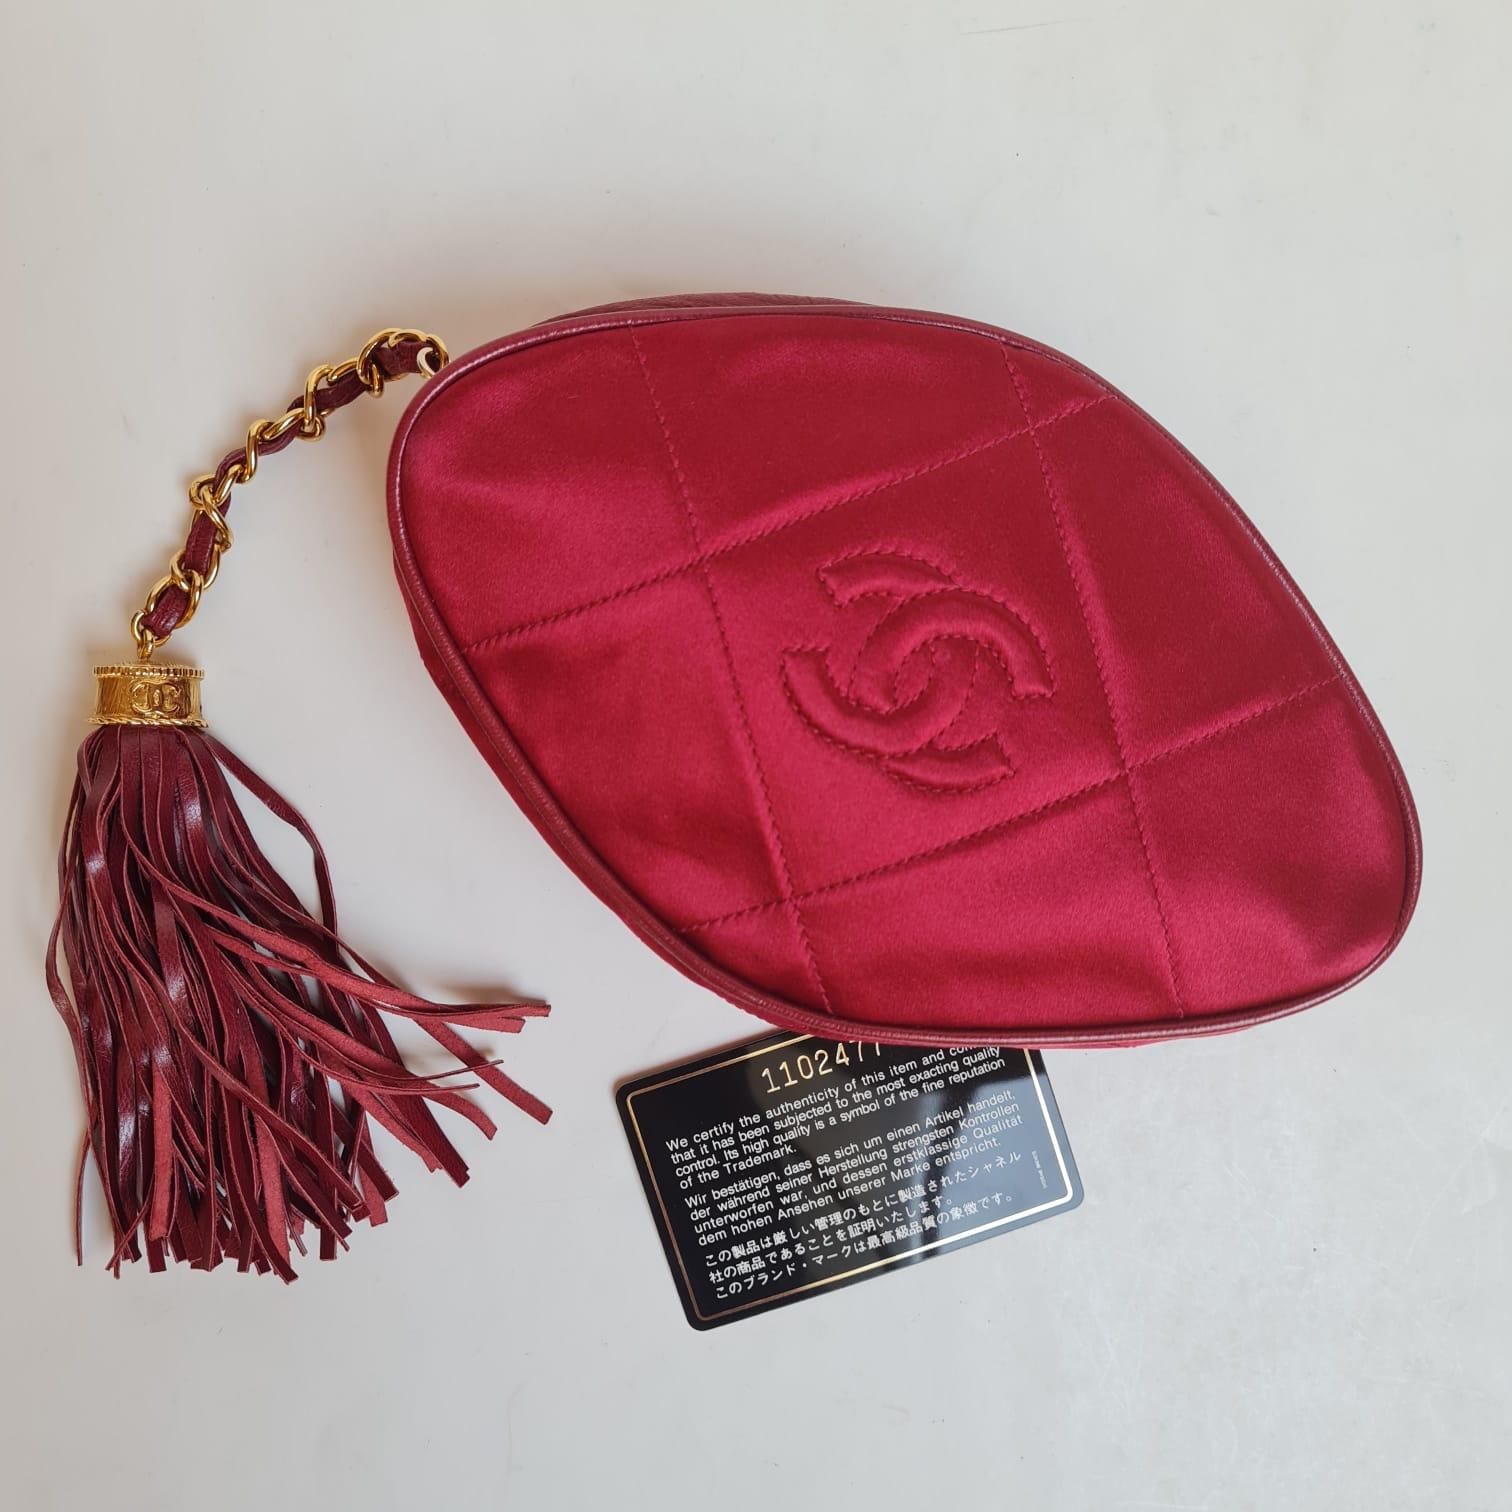 Vintage Chanel Red Satin Quilted Diamond Tasseled Clutch  In Good Condition For Sale In Jakarta, Daerah Khusus Ibukota Jakarta